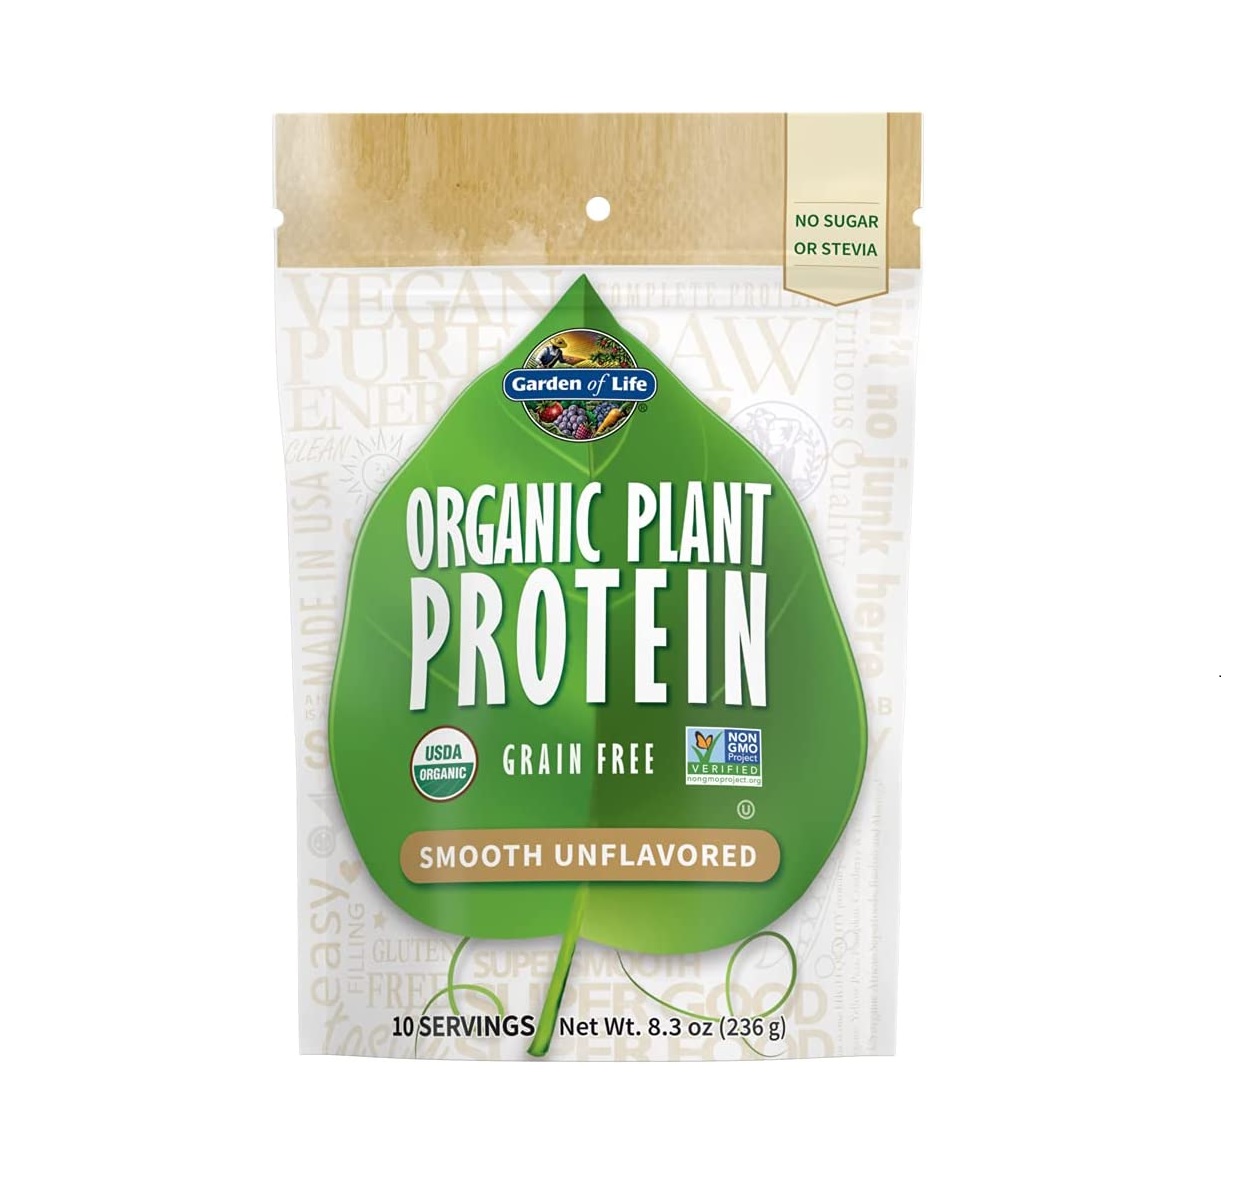 Garden of Life Organic Plant Protein Smooth Unflavored Protein Powder without Stevia